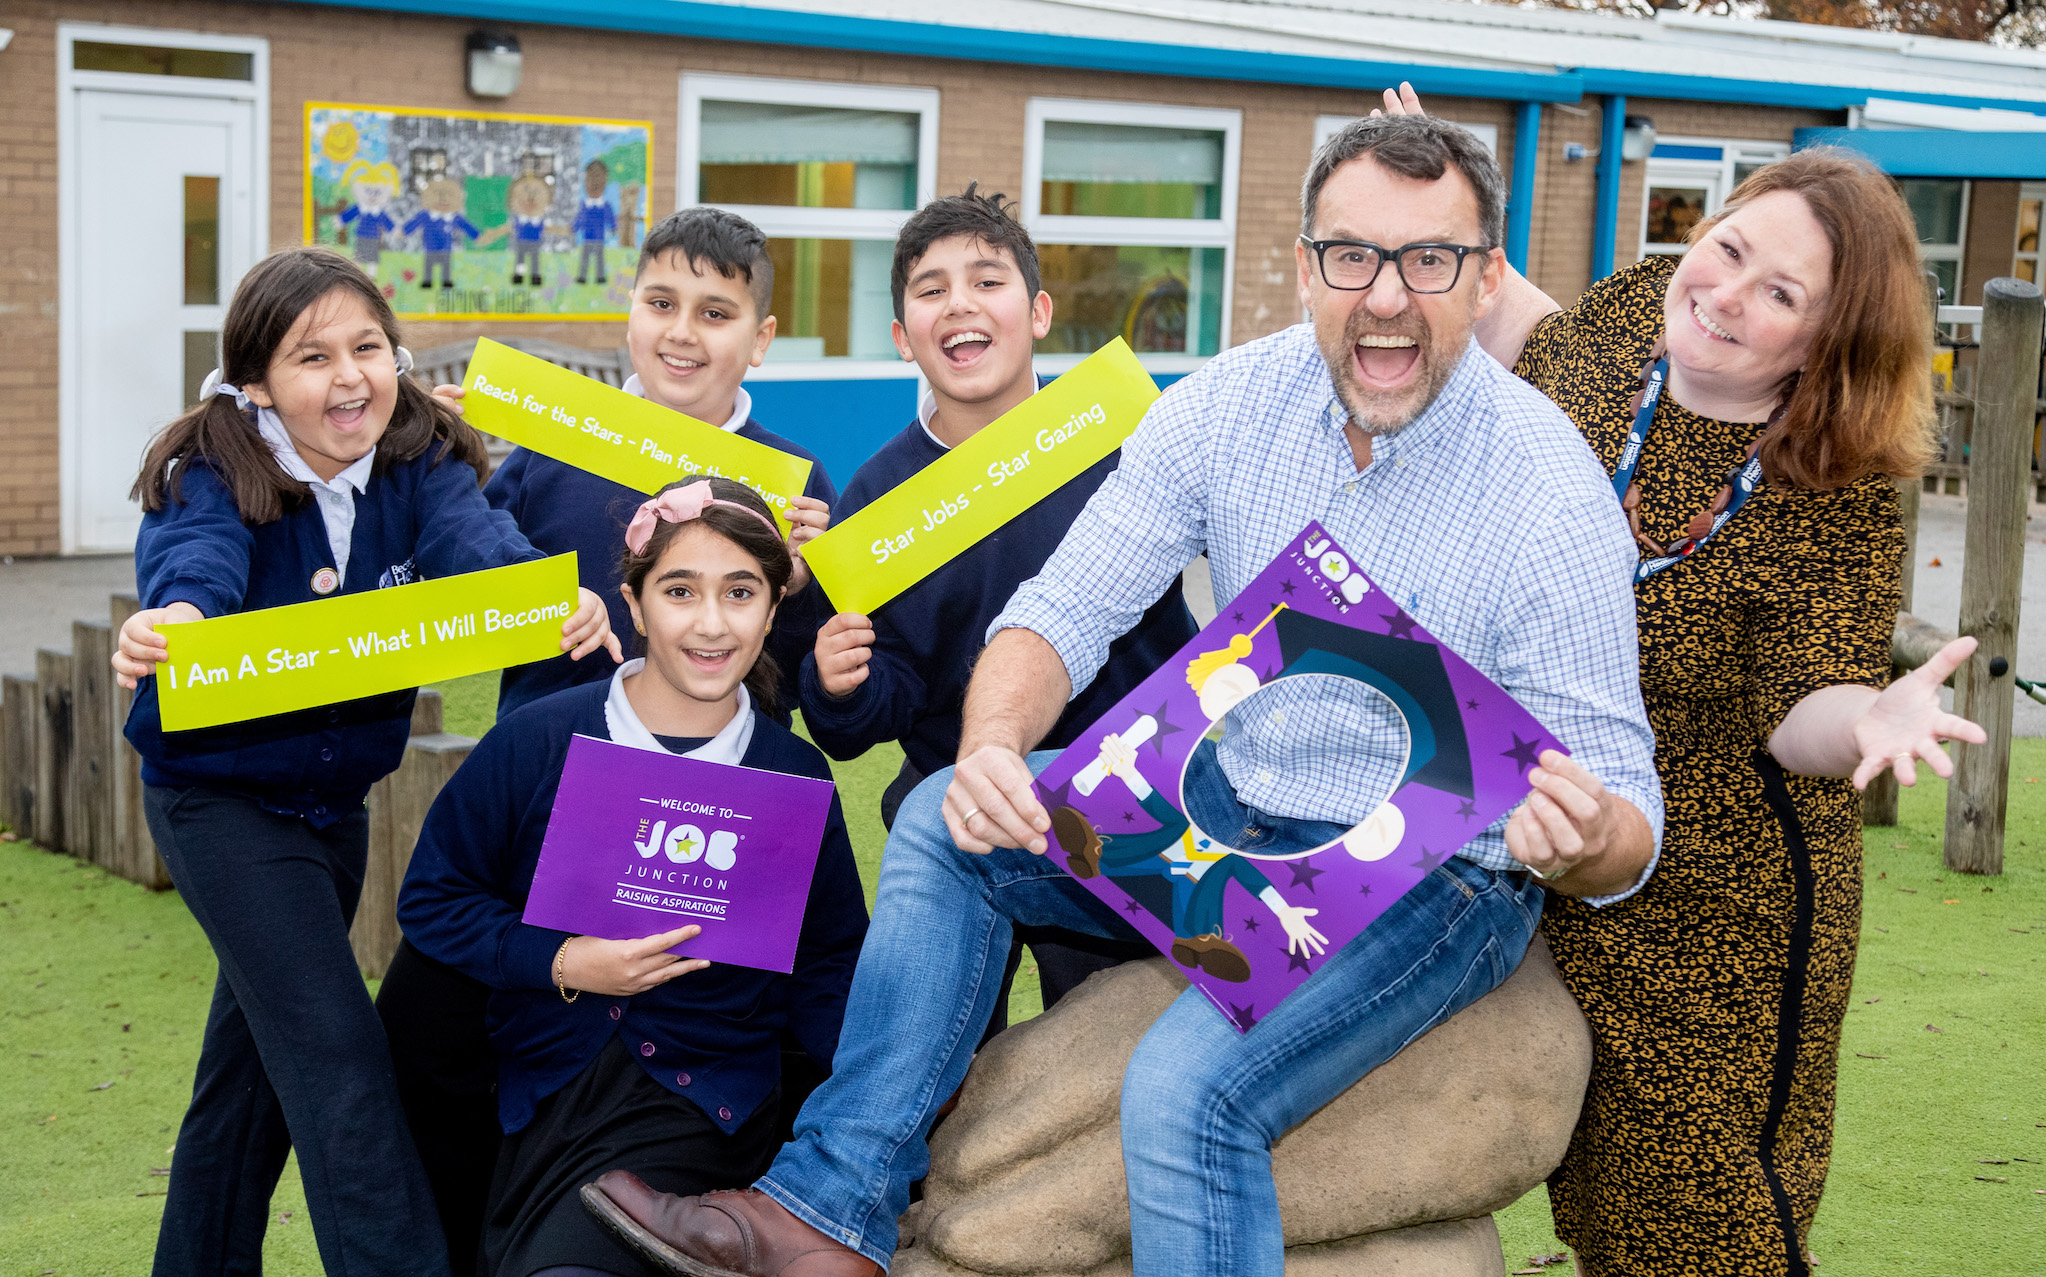 Specialist recruitment firm invests to help raise aspirations in primary schools